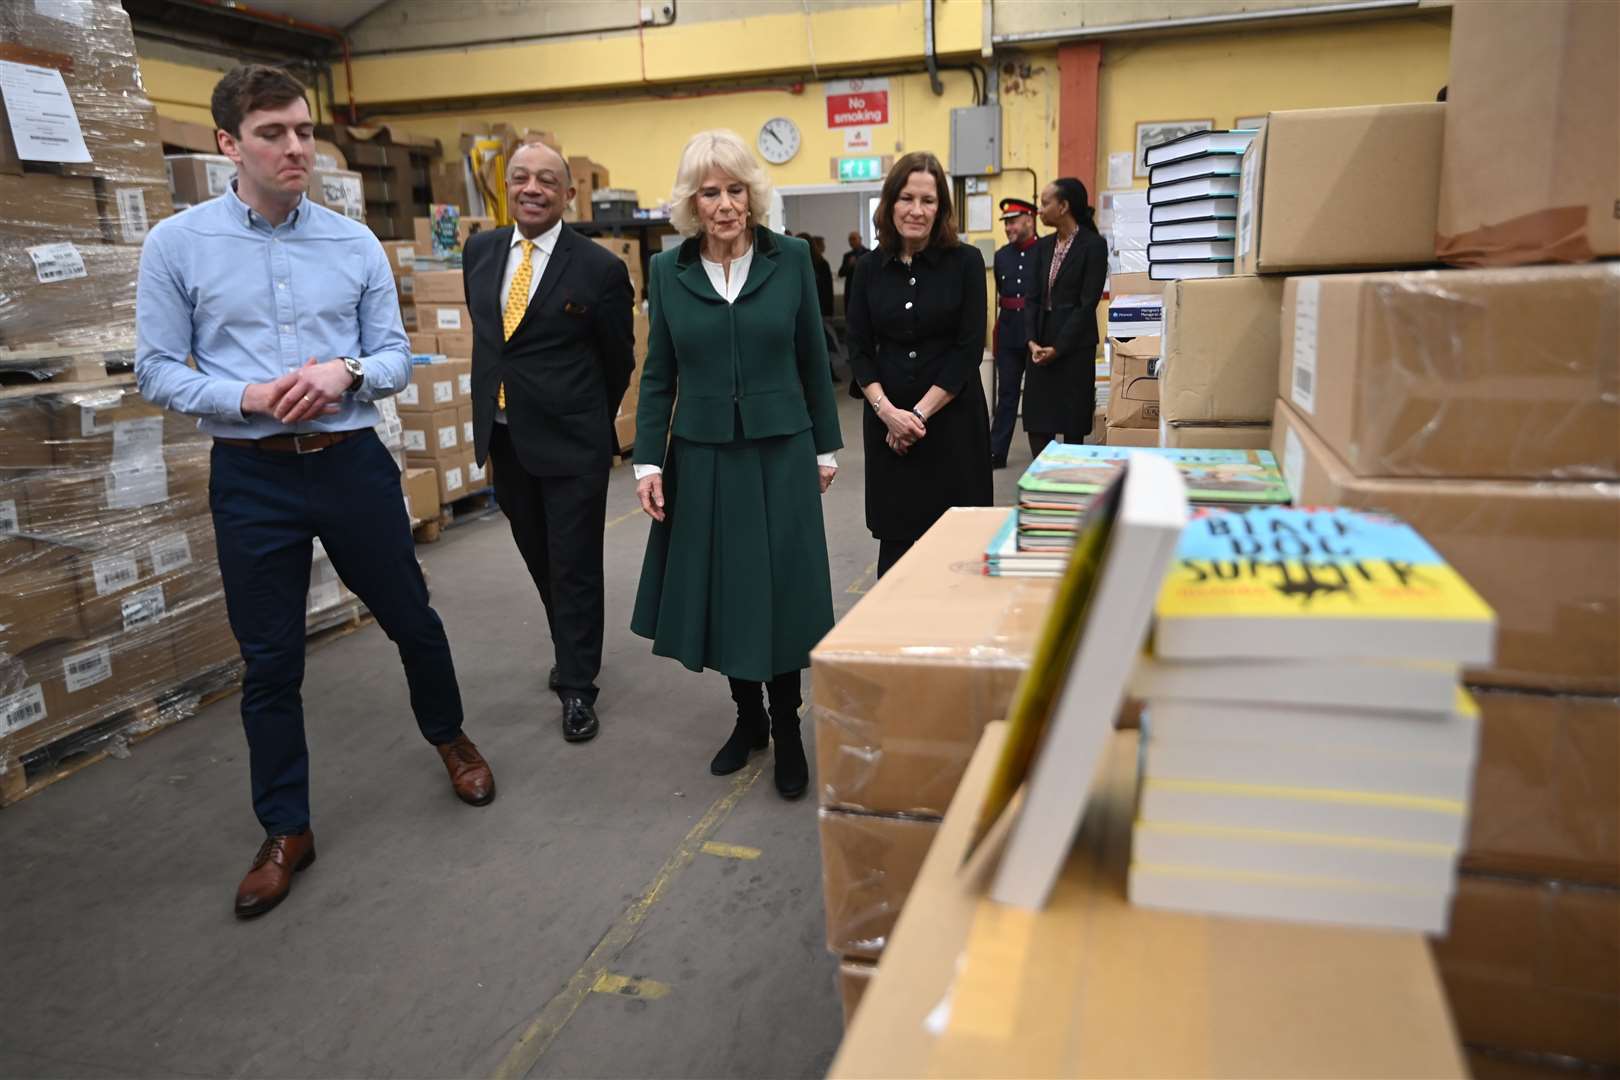 The Queen Consort met staff during her tour of Book Aid International’s warehouse (Eddie Mulholland/Daily Telegraph/PA)